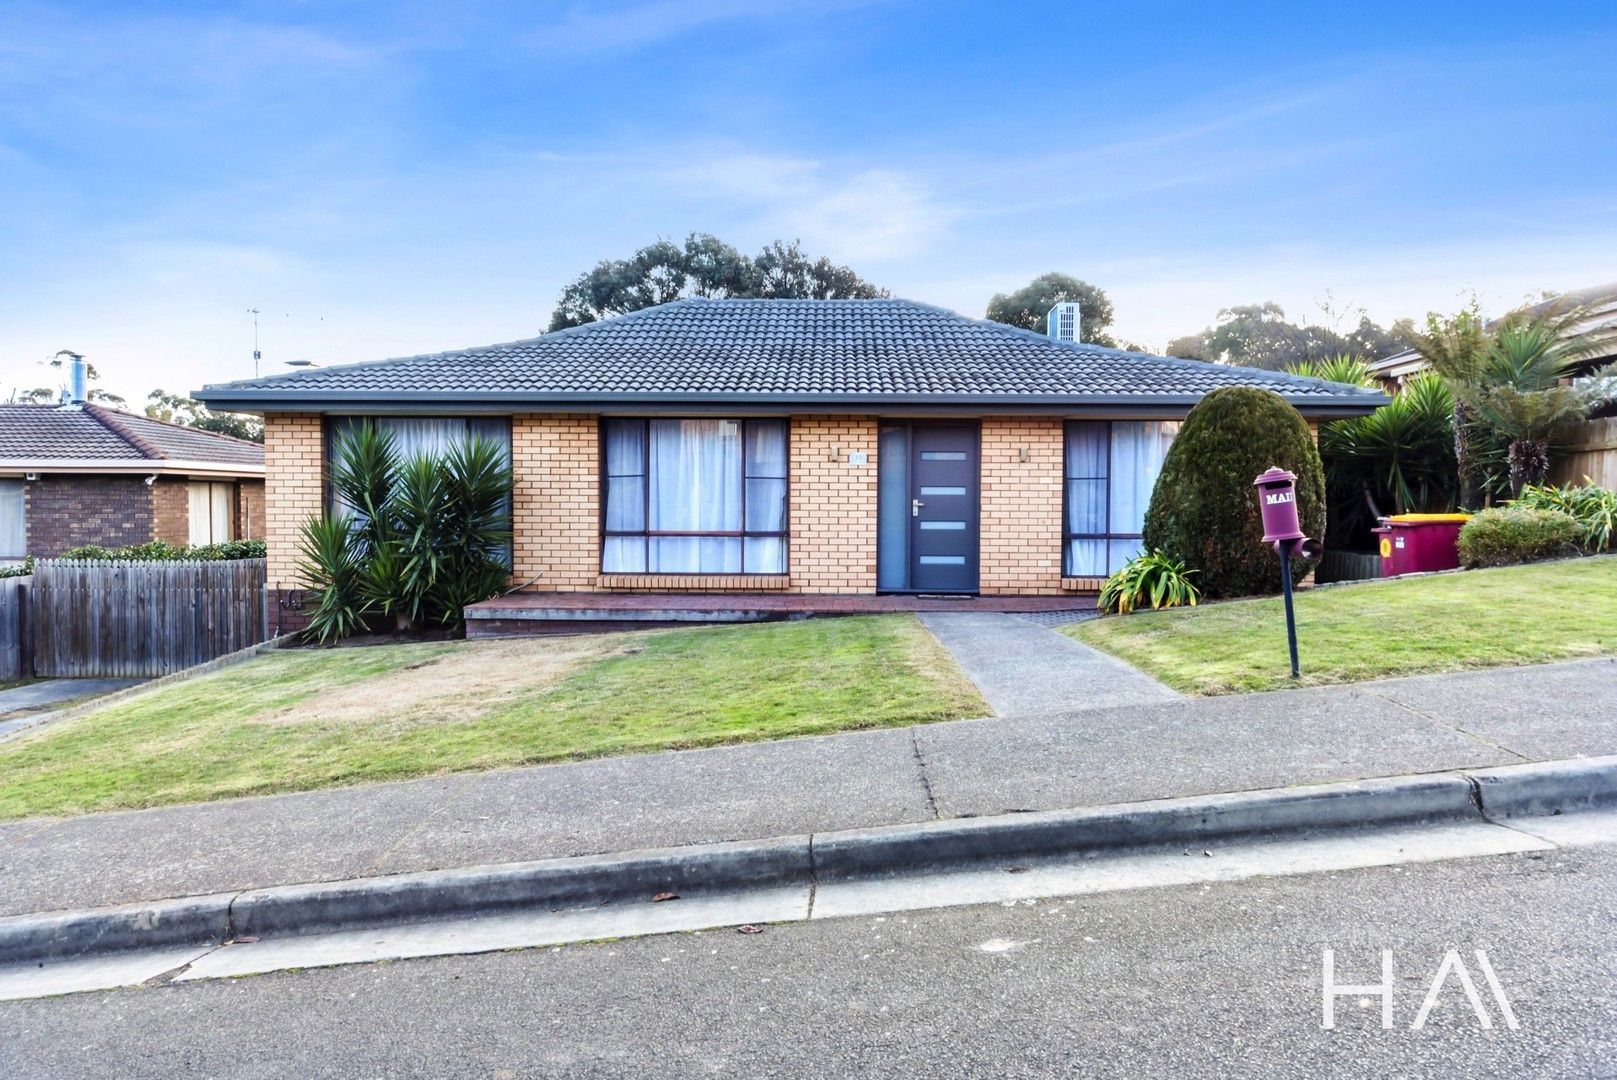 3 bedrooms House in 10 Belgrave Parade YOUNGTOWN TAS, 7249